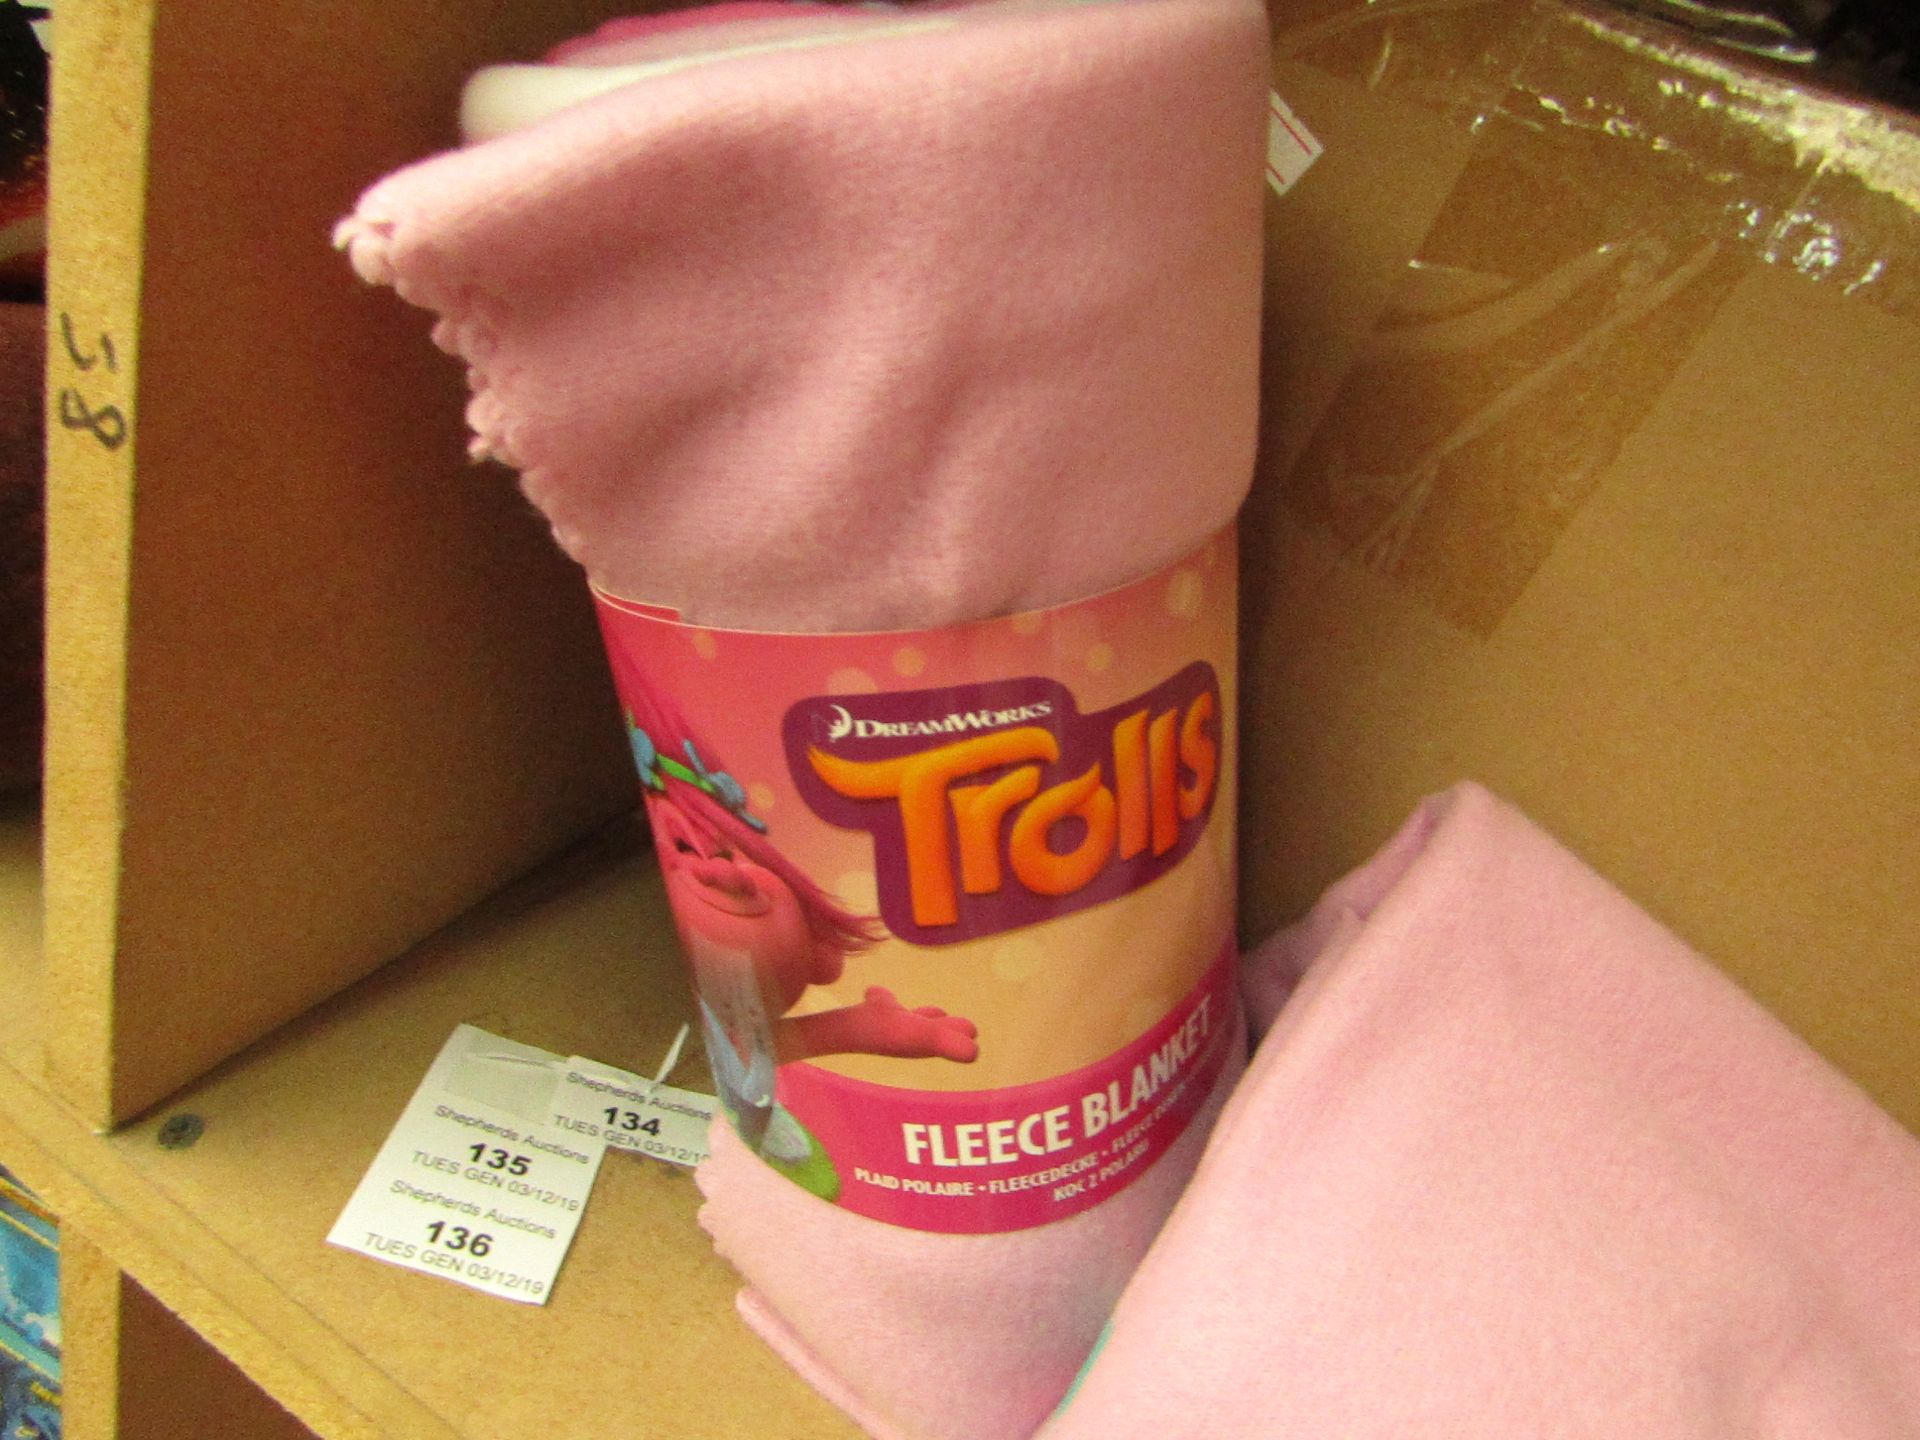 Trolls Fleece Blanket. New with Tags. Ideal Stocking filler.